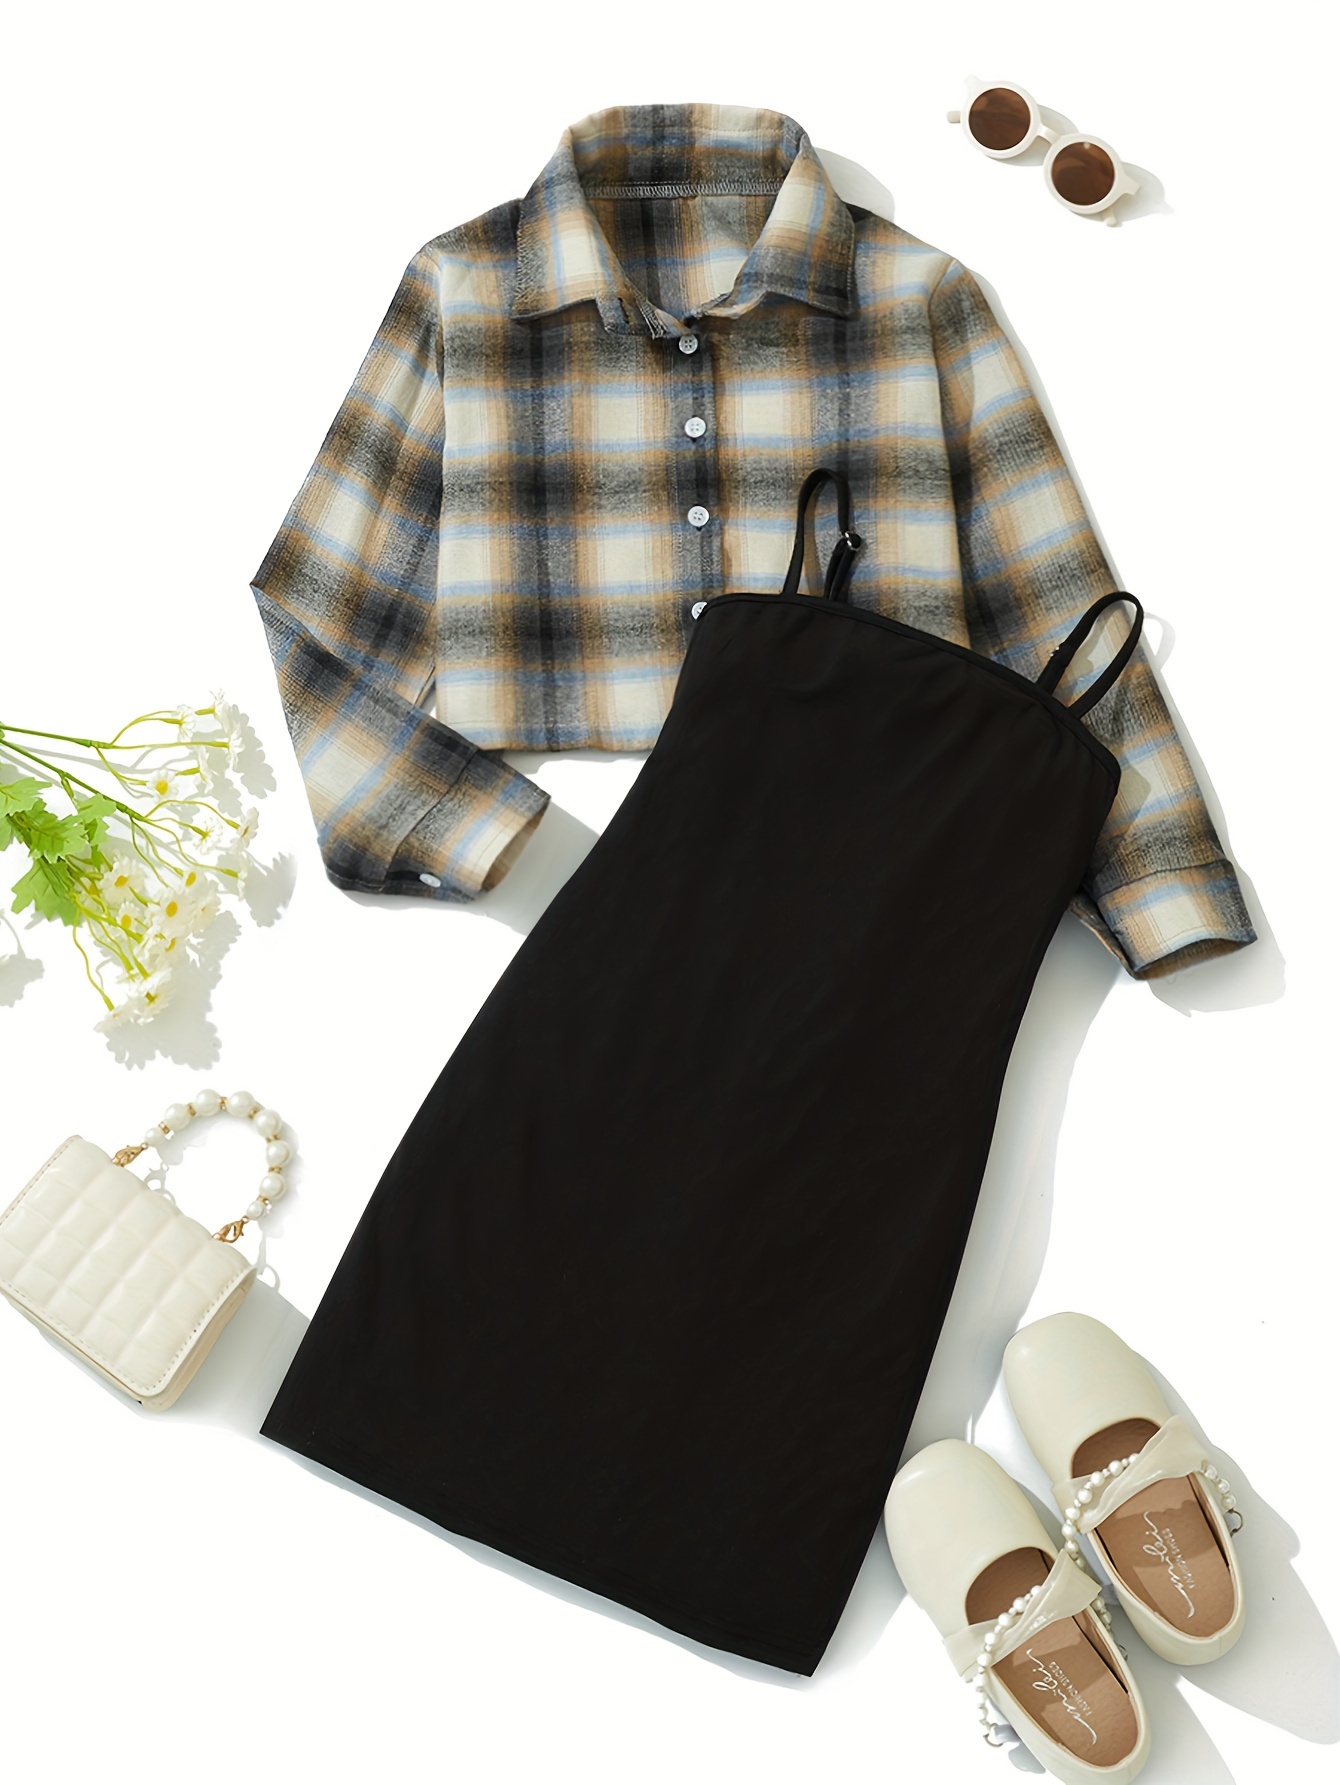 Summer, weekend outfit, ideas, casual, gingham, shirt